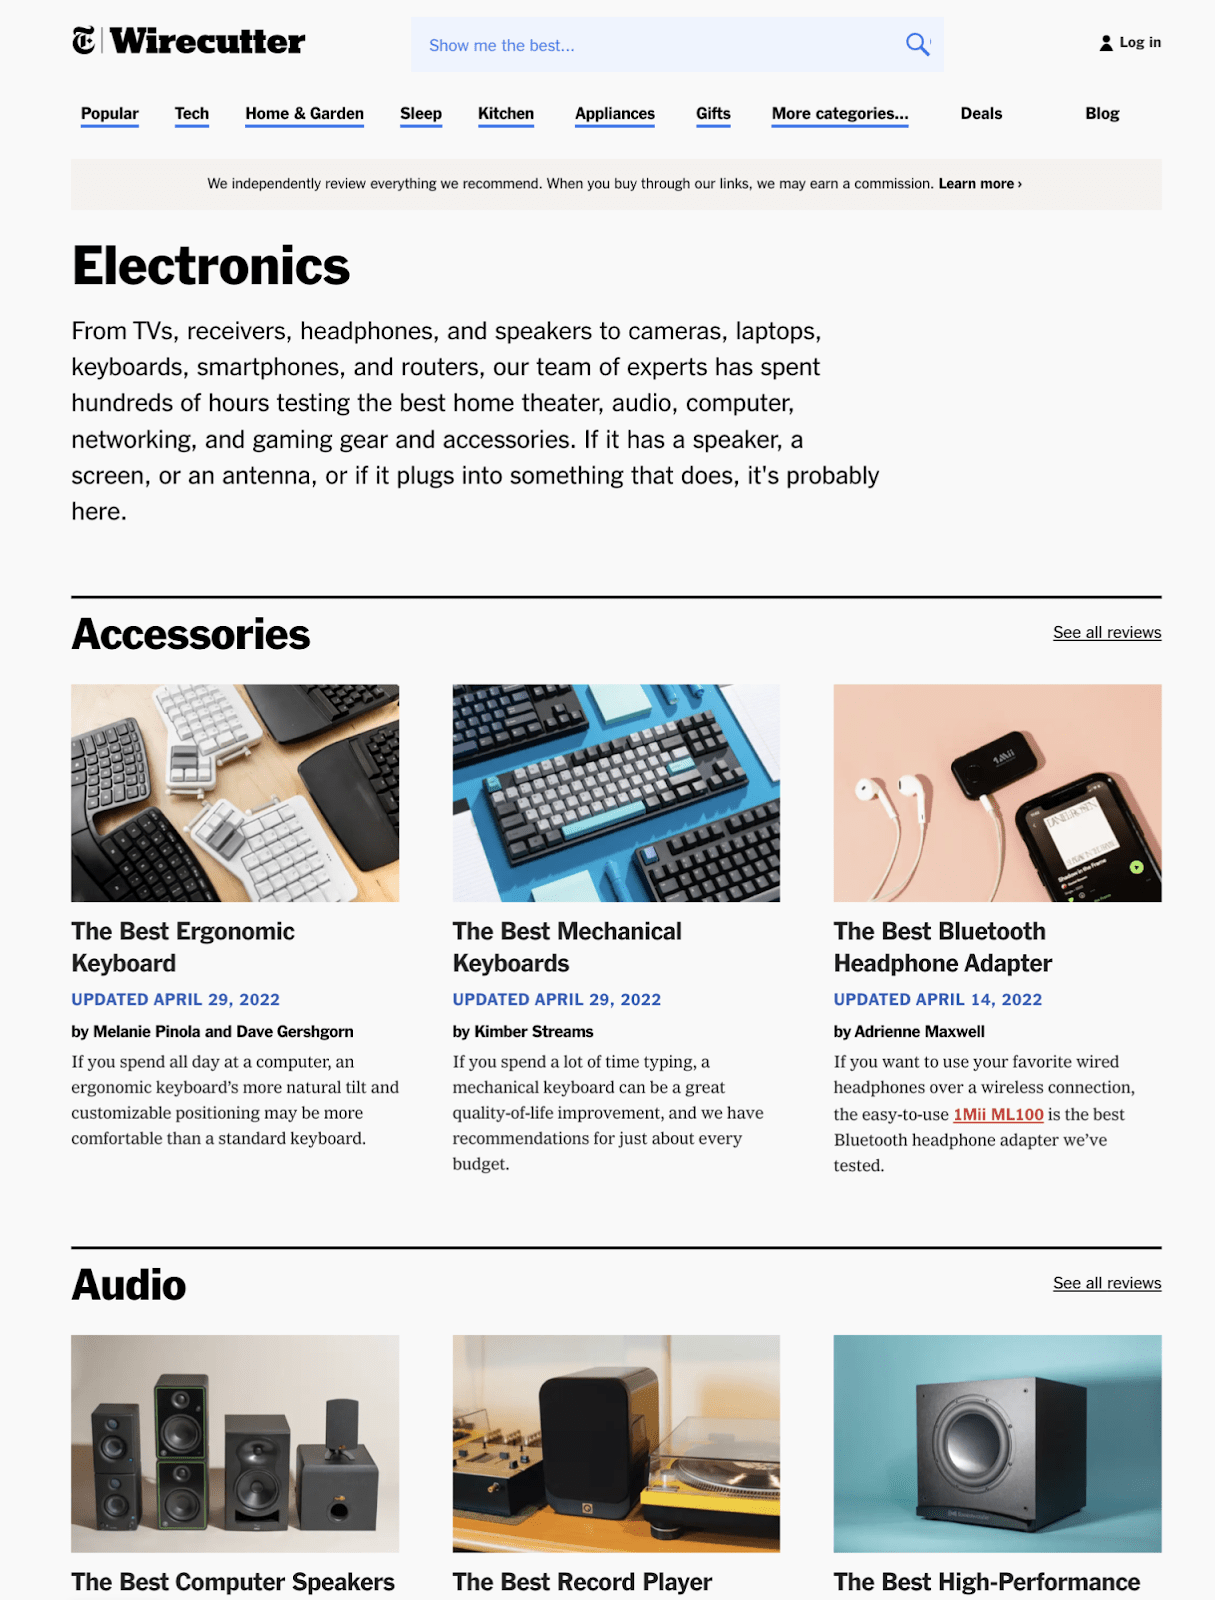 Short write-up about Electronics category; below, reviews in grid format  